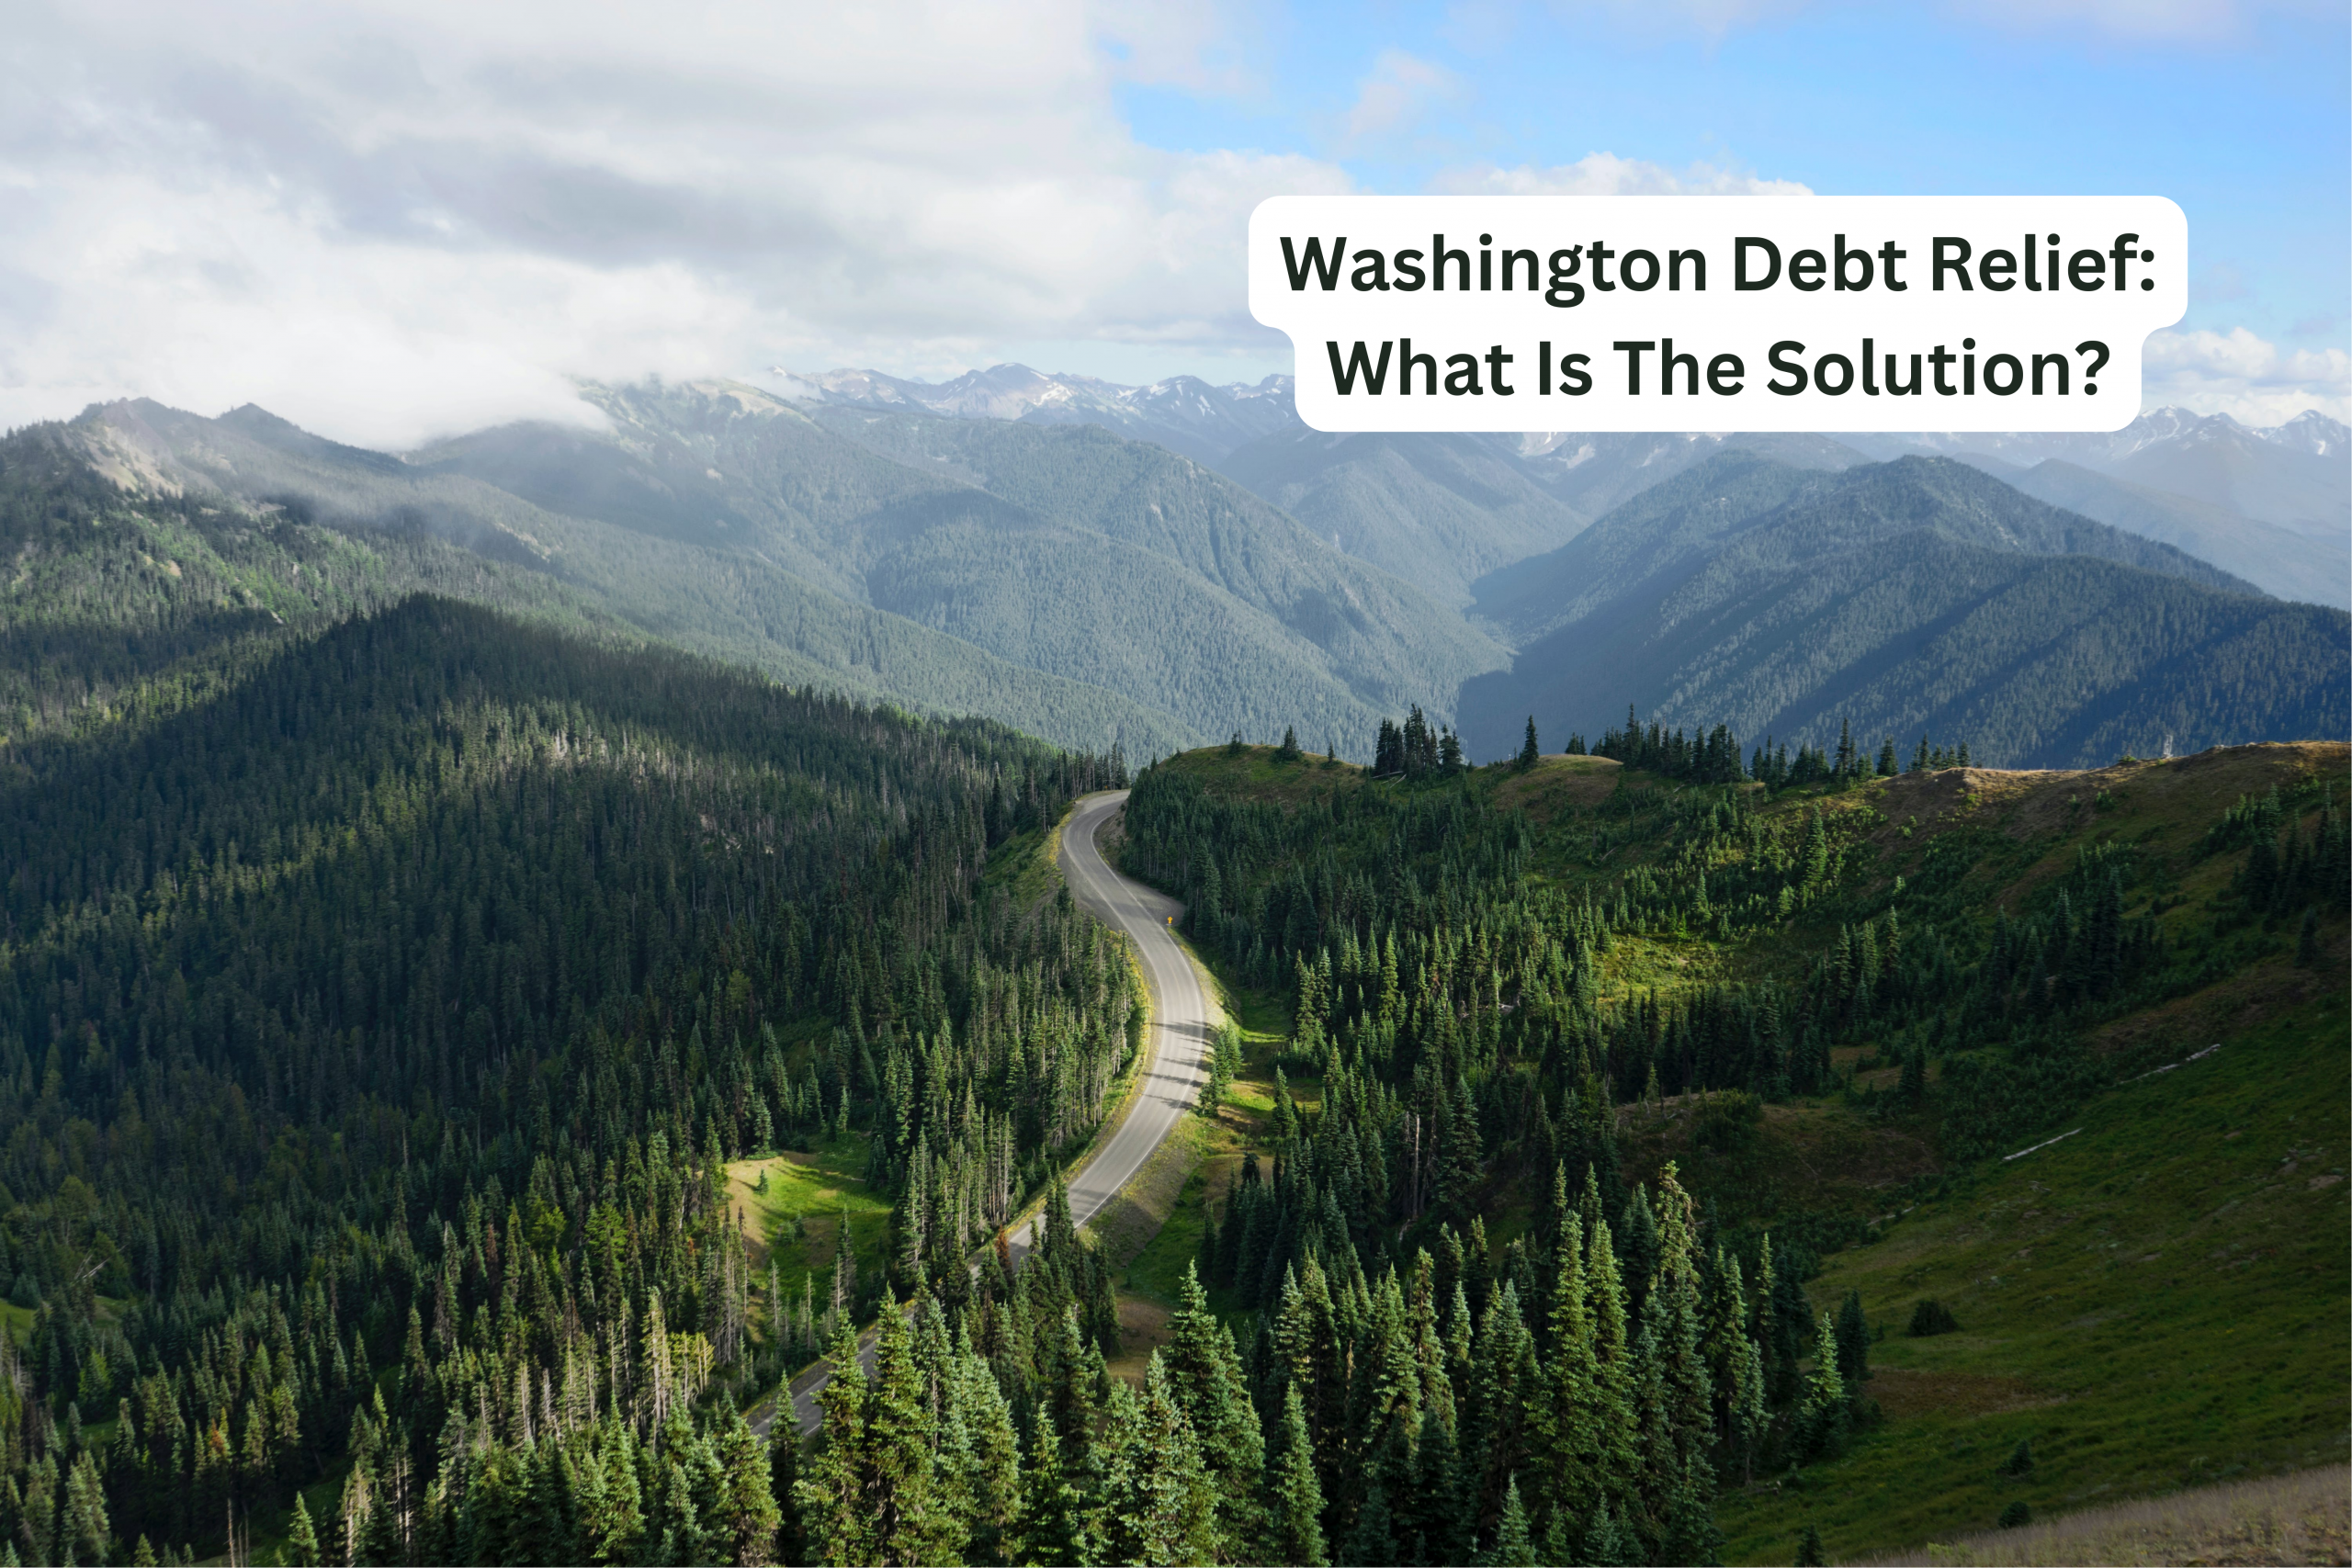 Washington Debt Relief: What Is The Solution?